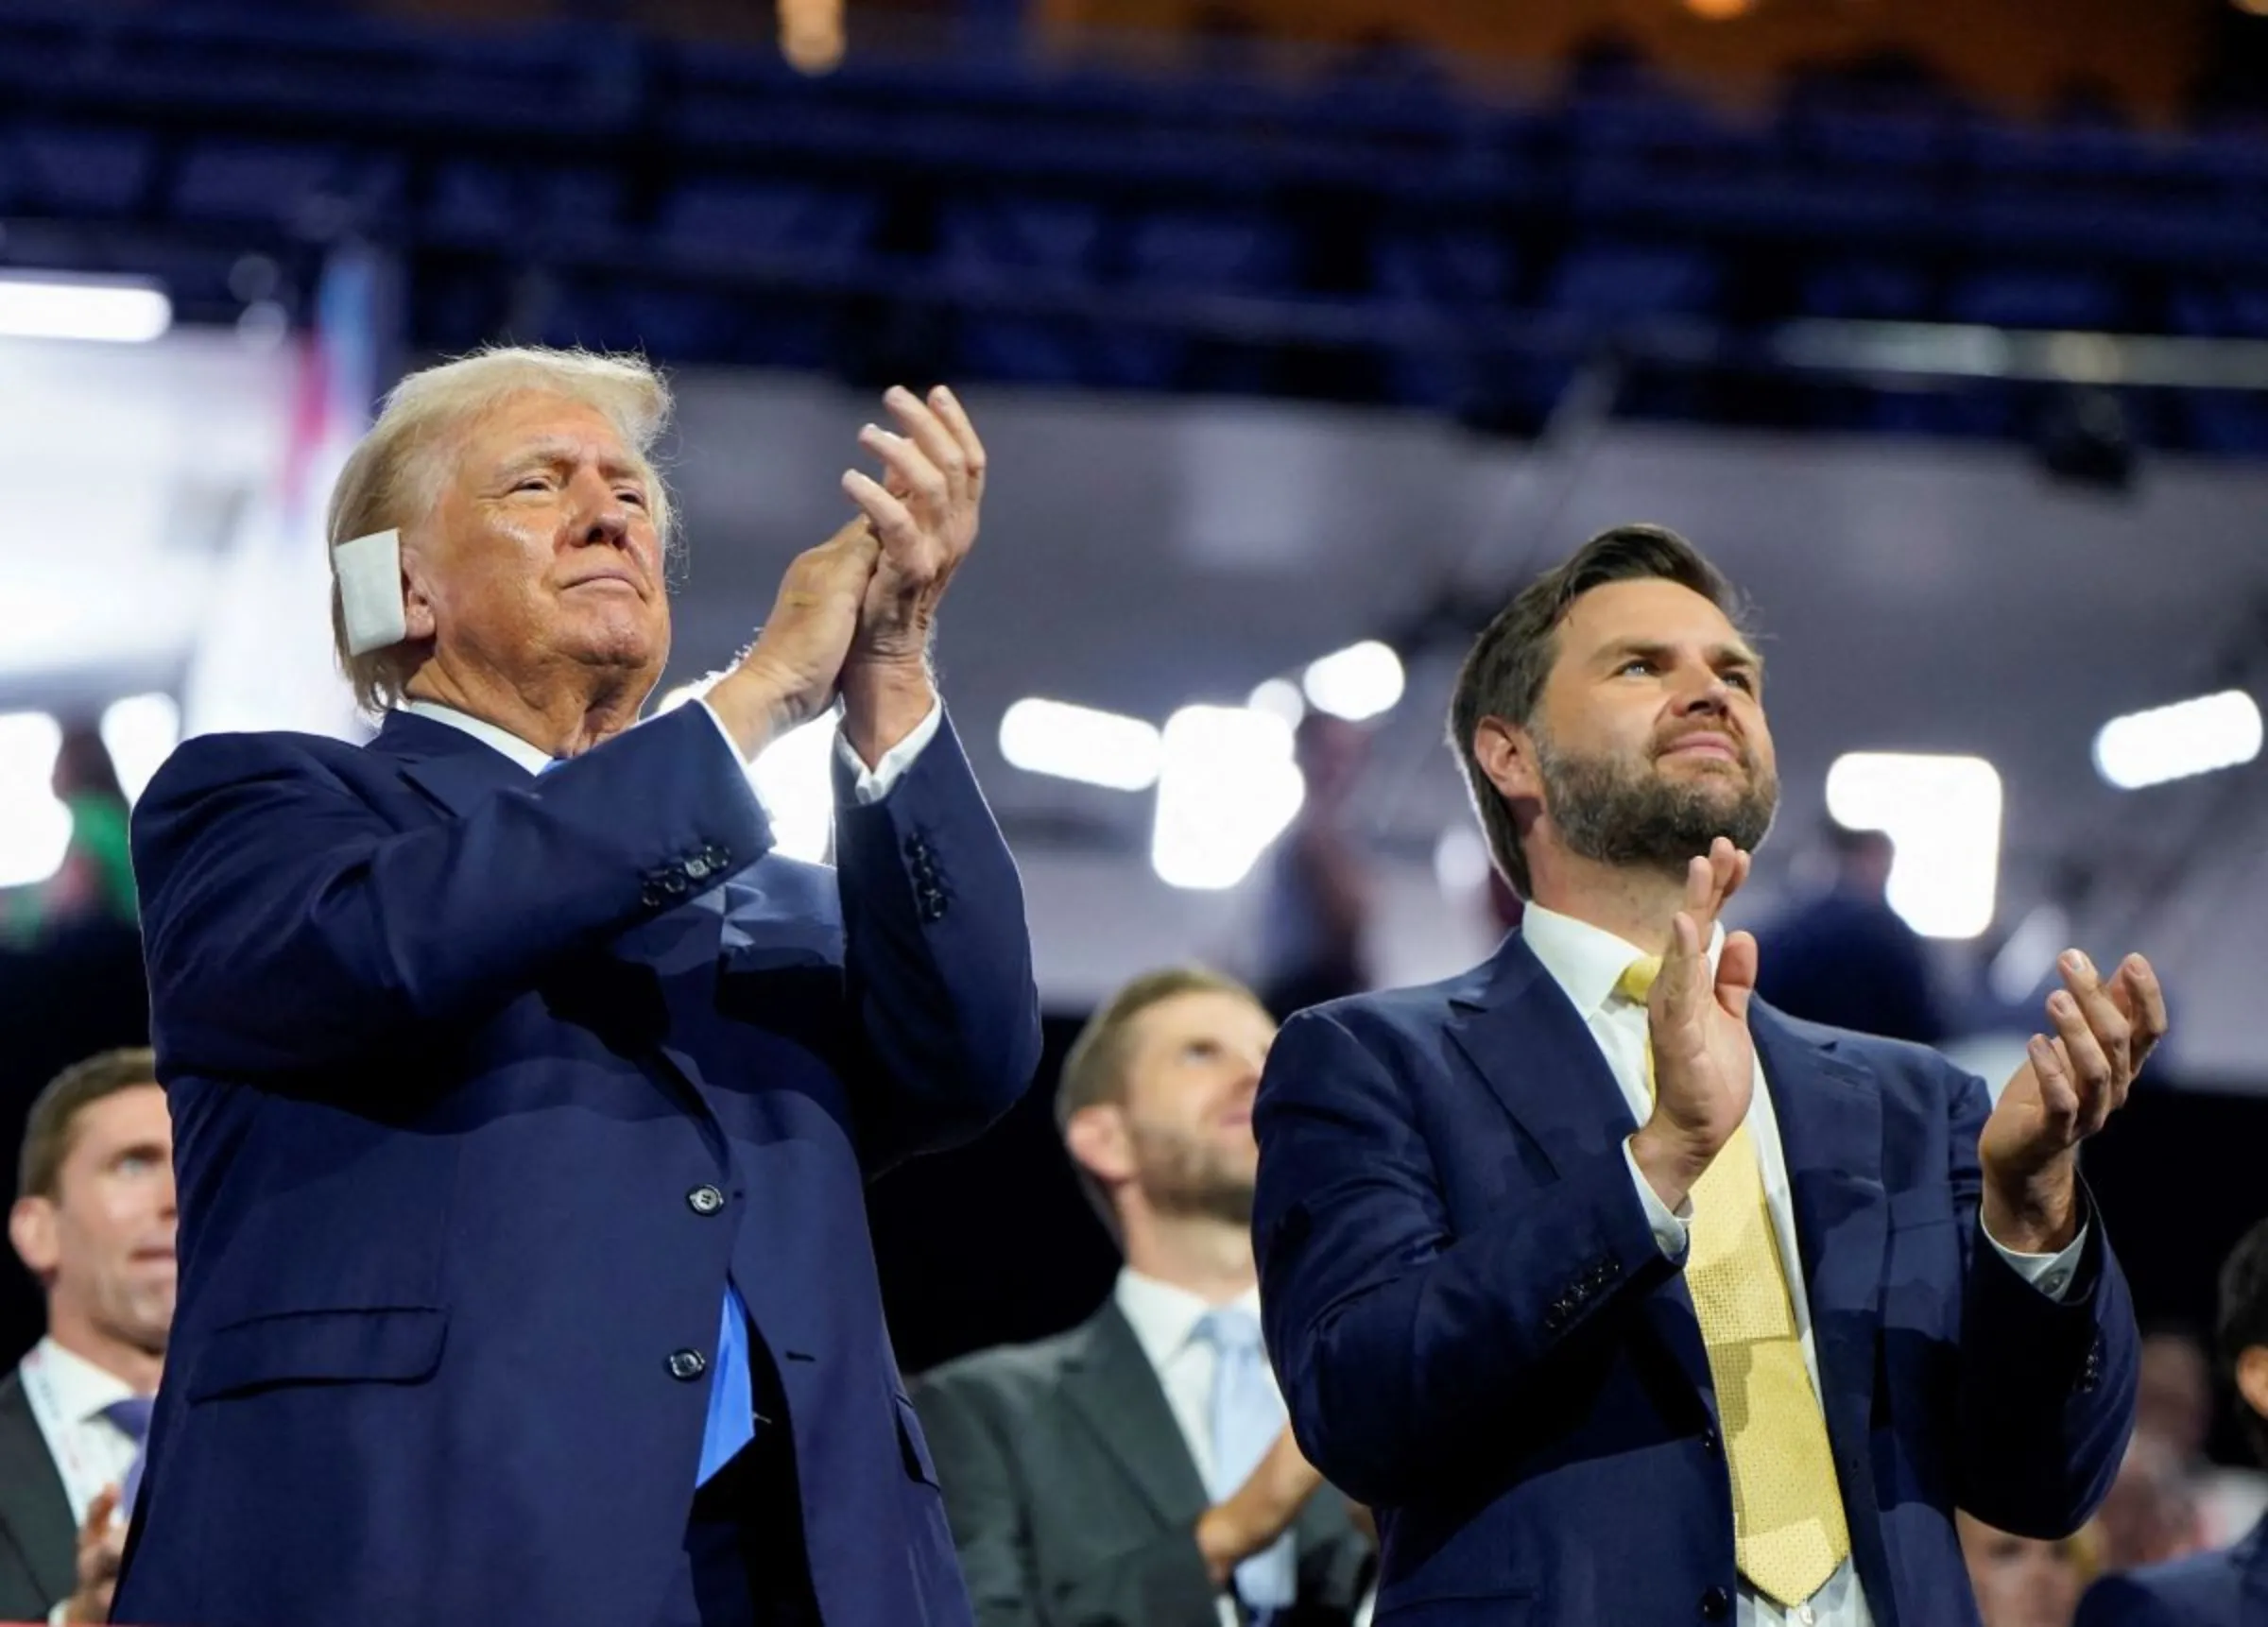 Republican presidential nominee and former U.S. President Donald Trump and Republican vice presidential nominee J.D. Vance applaud on Day 2 of the Republican National Convention (RNC), in Milwaukee, Wisconsin, U.S., July 16, 2024. REUTERS/Elizabeth Frantz